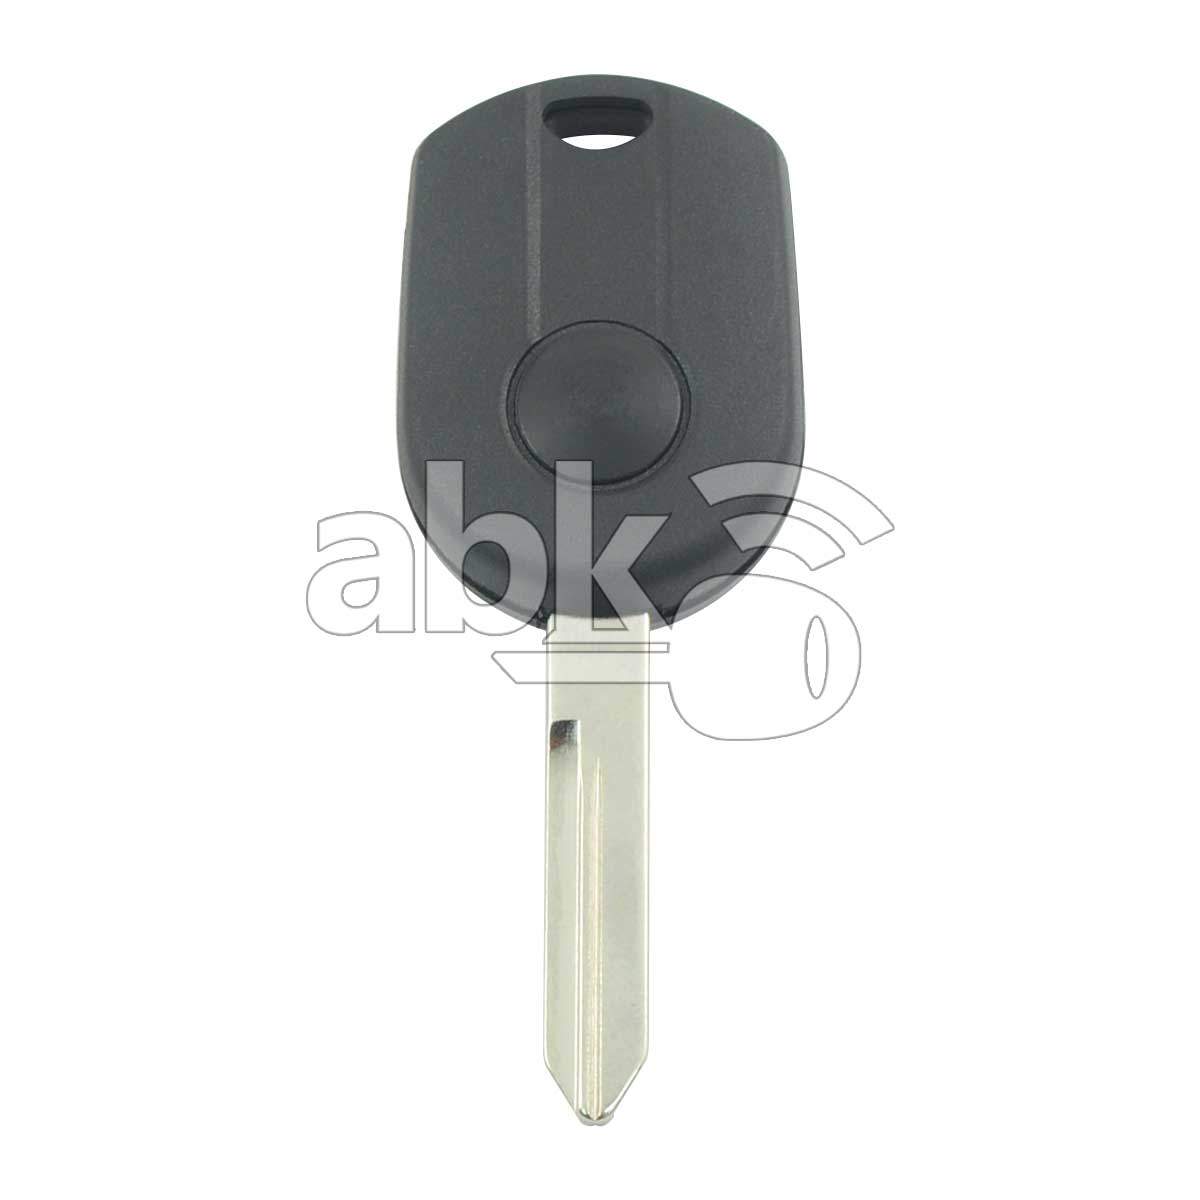 Genuine Ford Edge Expedition Explorer Mustang 2007+ Key Head Remote 4Buttons OUCD6000022 315MHz 